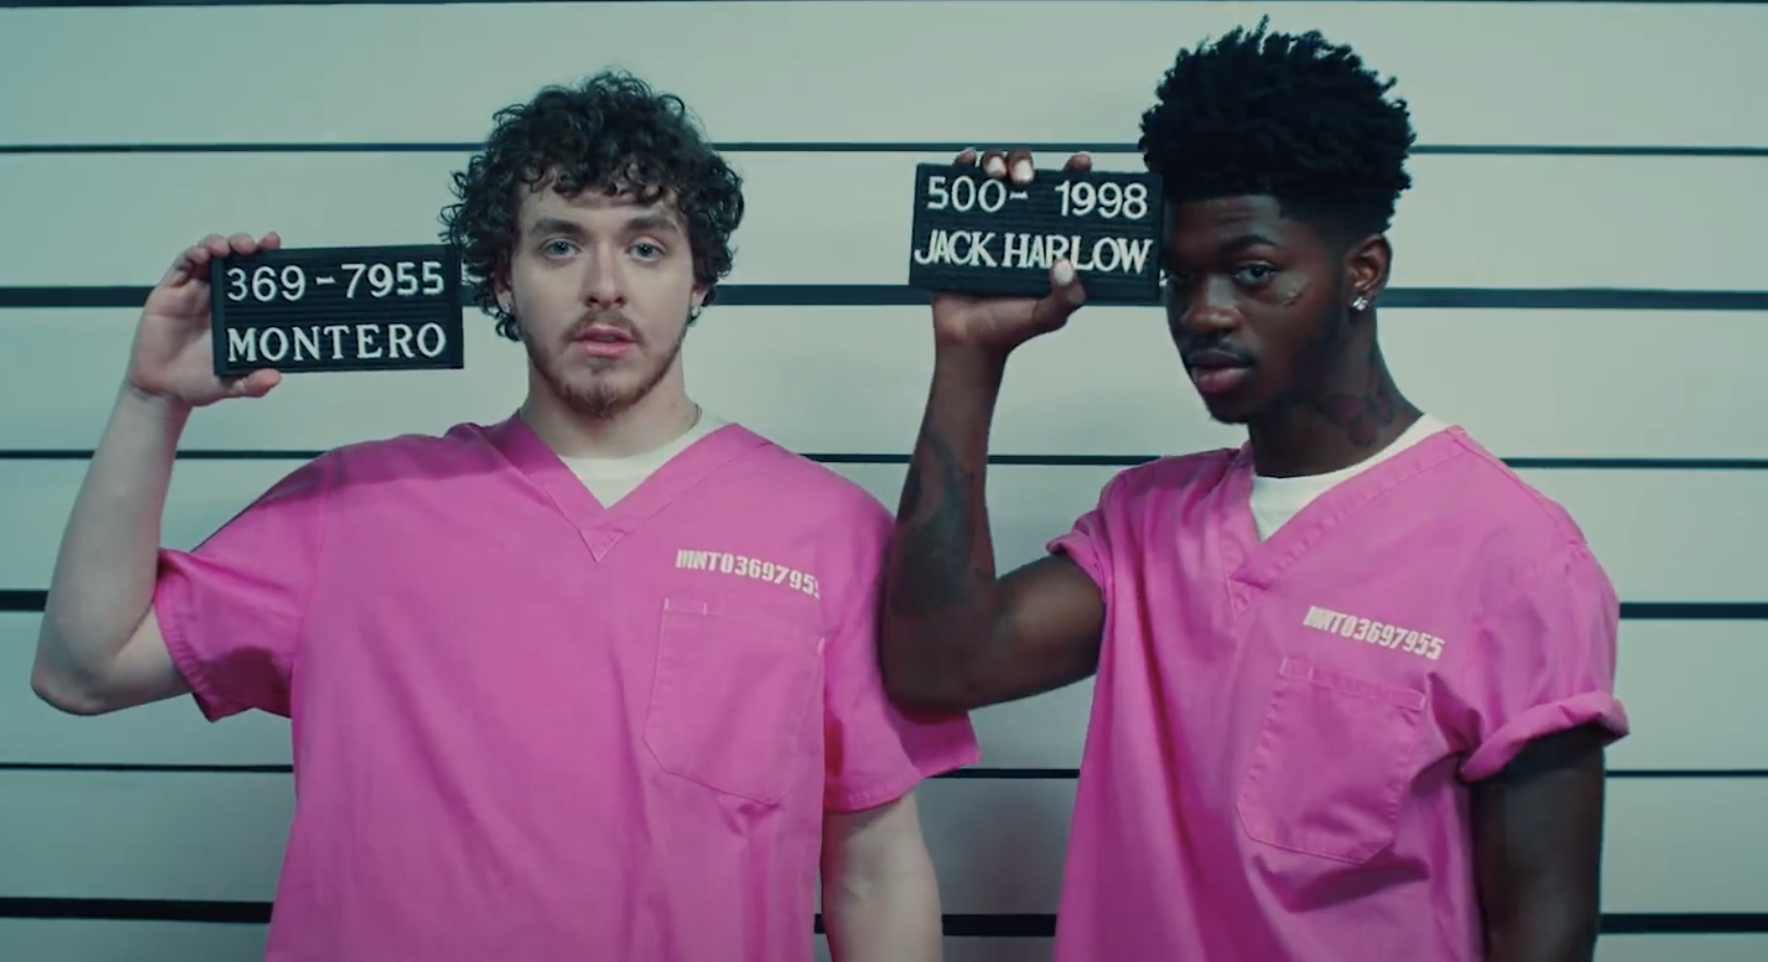 Lil Nas X and Jack Harlow in front of a police lineup